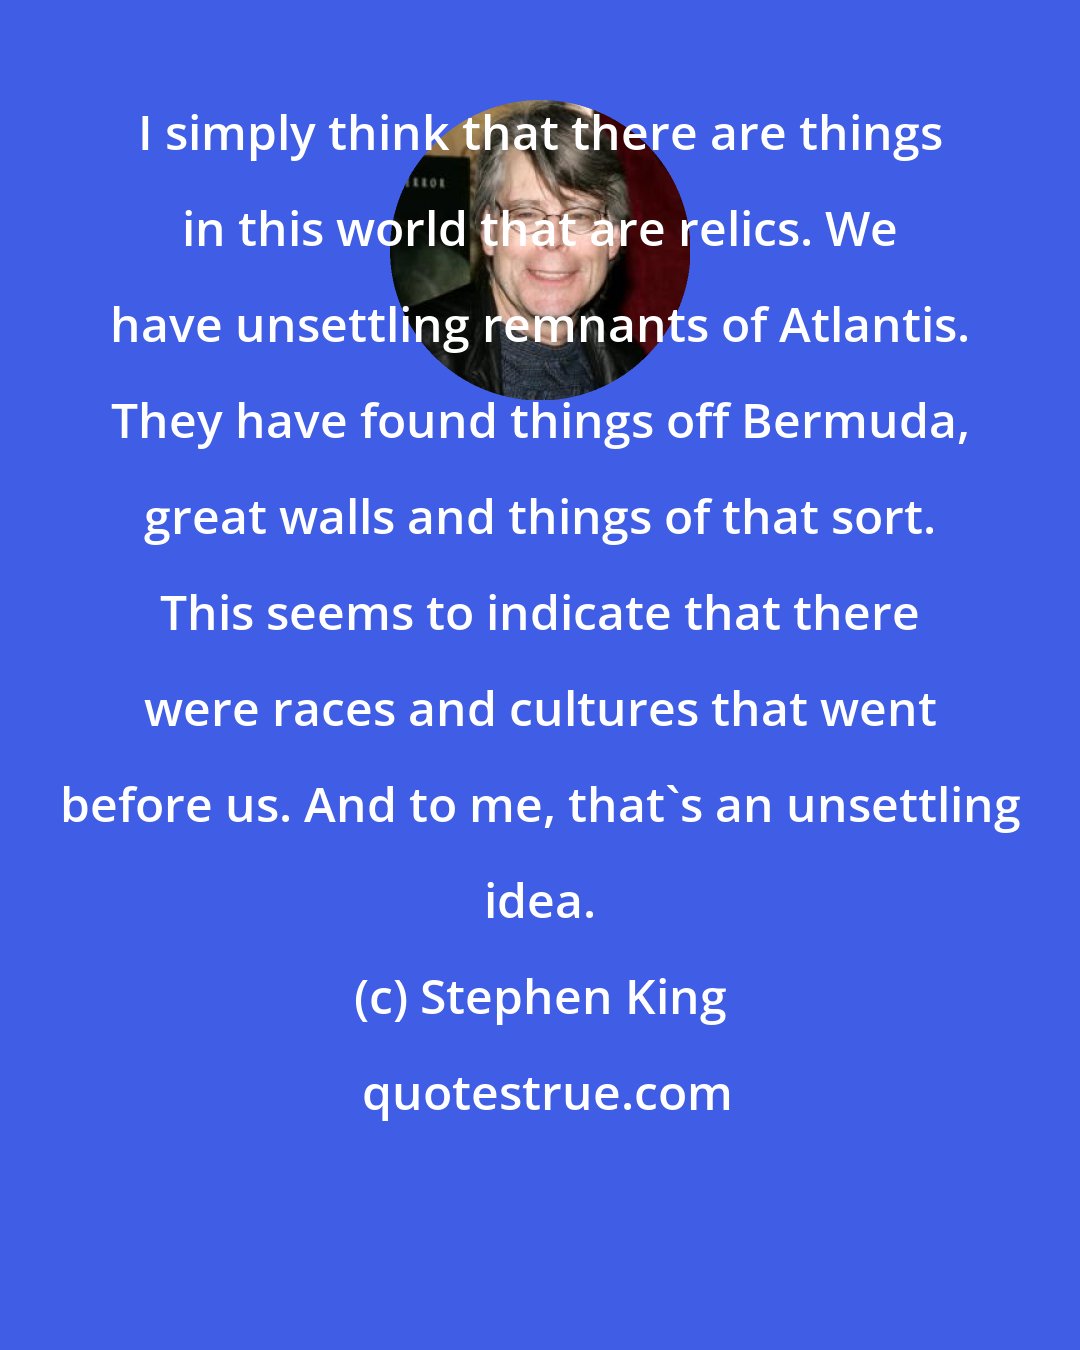 Stephen King: I simply think that there are things in this world that are relics. We have unsettling remnants of Atlantis. They have found things off Bermuda, great walls and things of that sort. This seems to indicate that there were races and cultures that went before us. And to me, that's an unsettling idea.